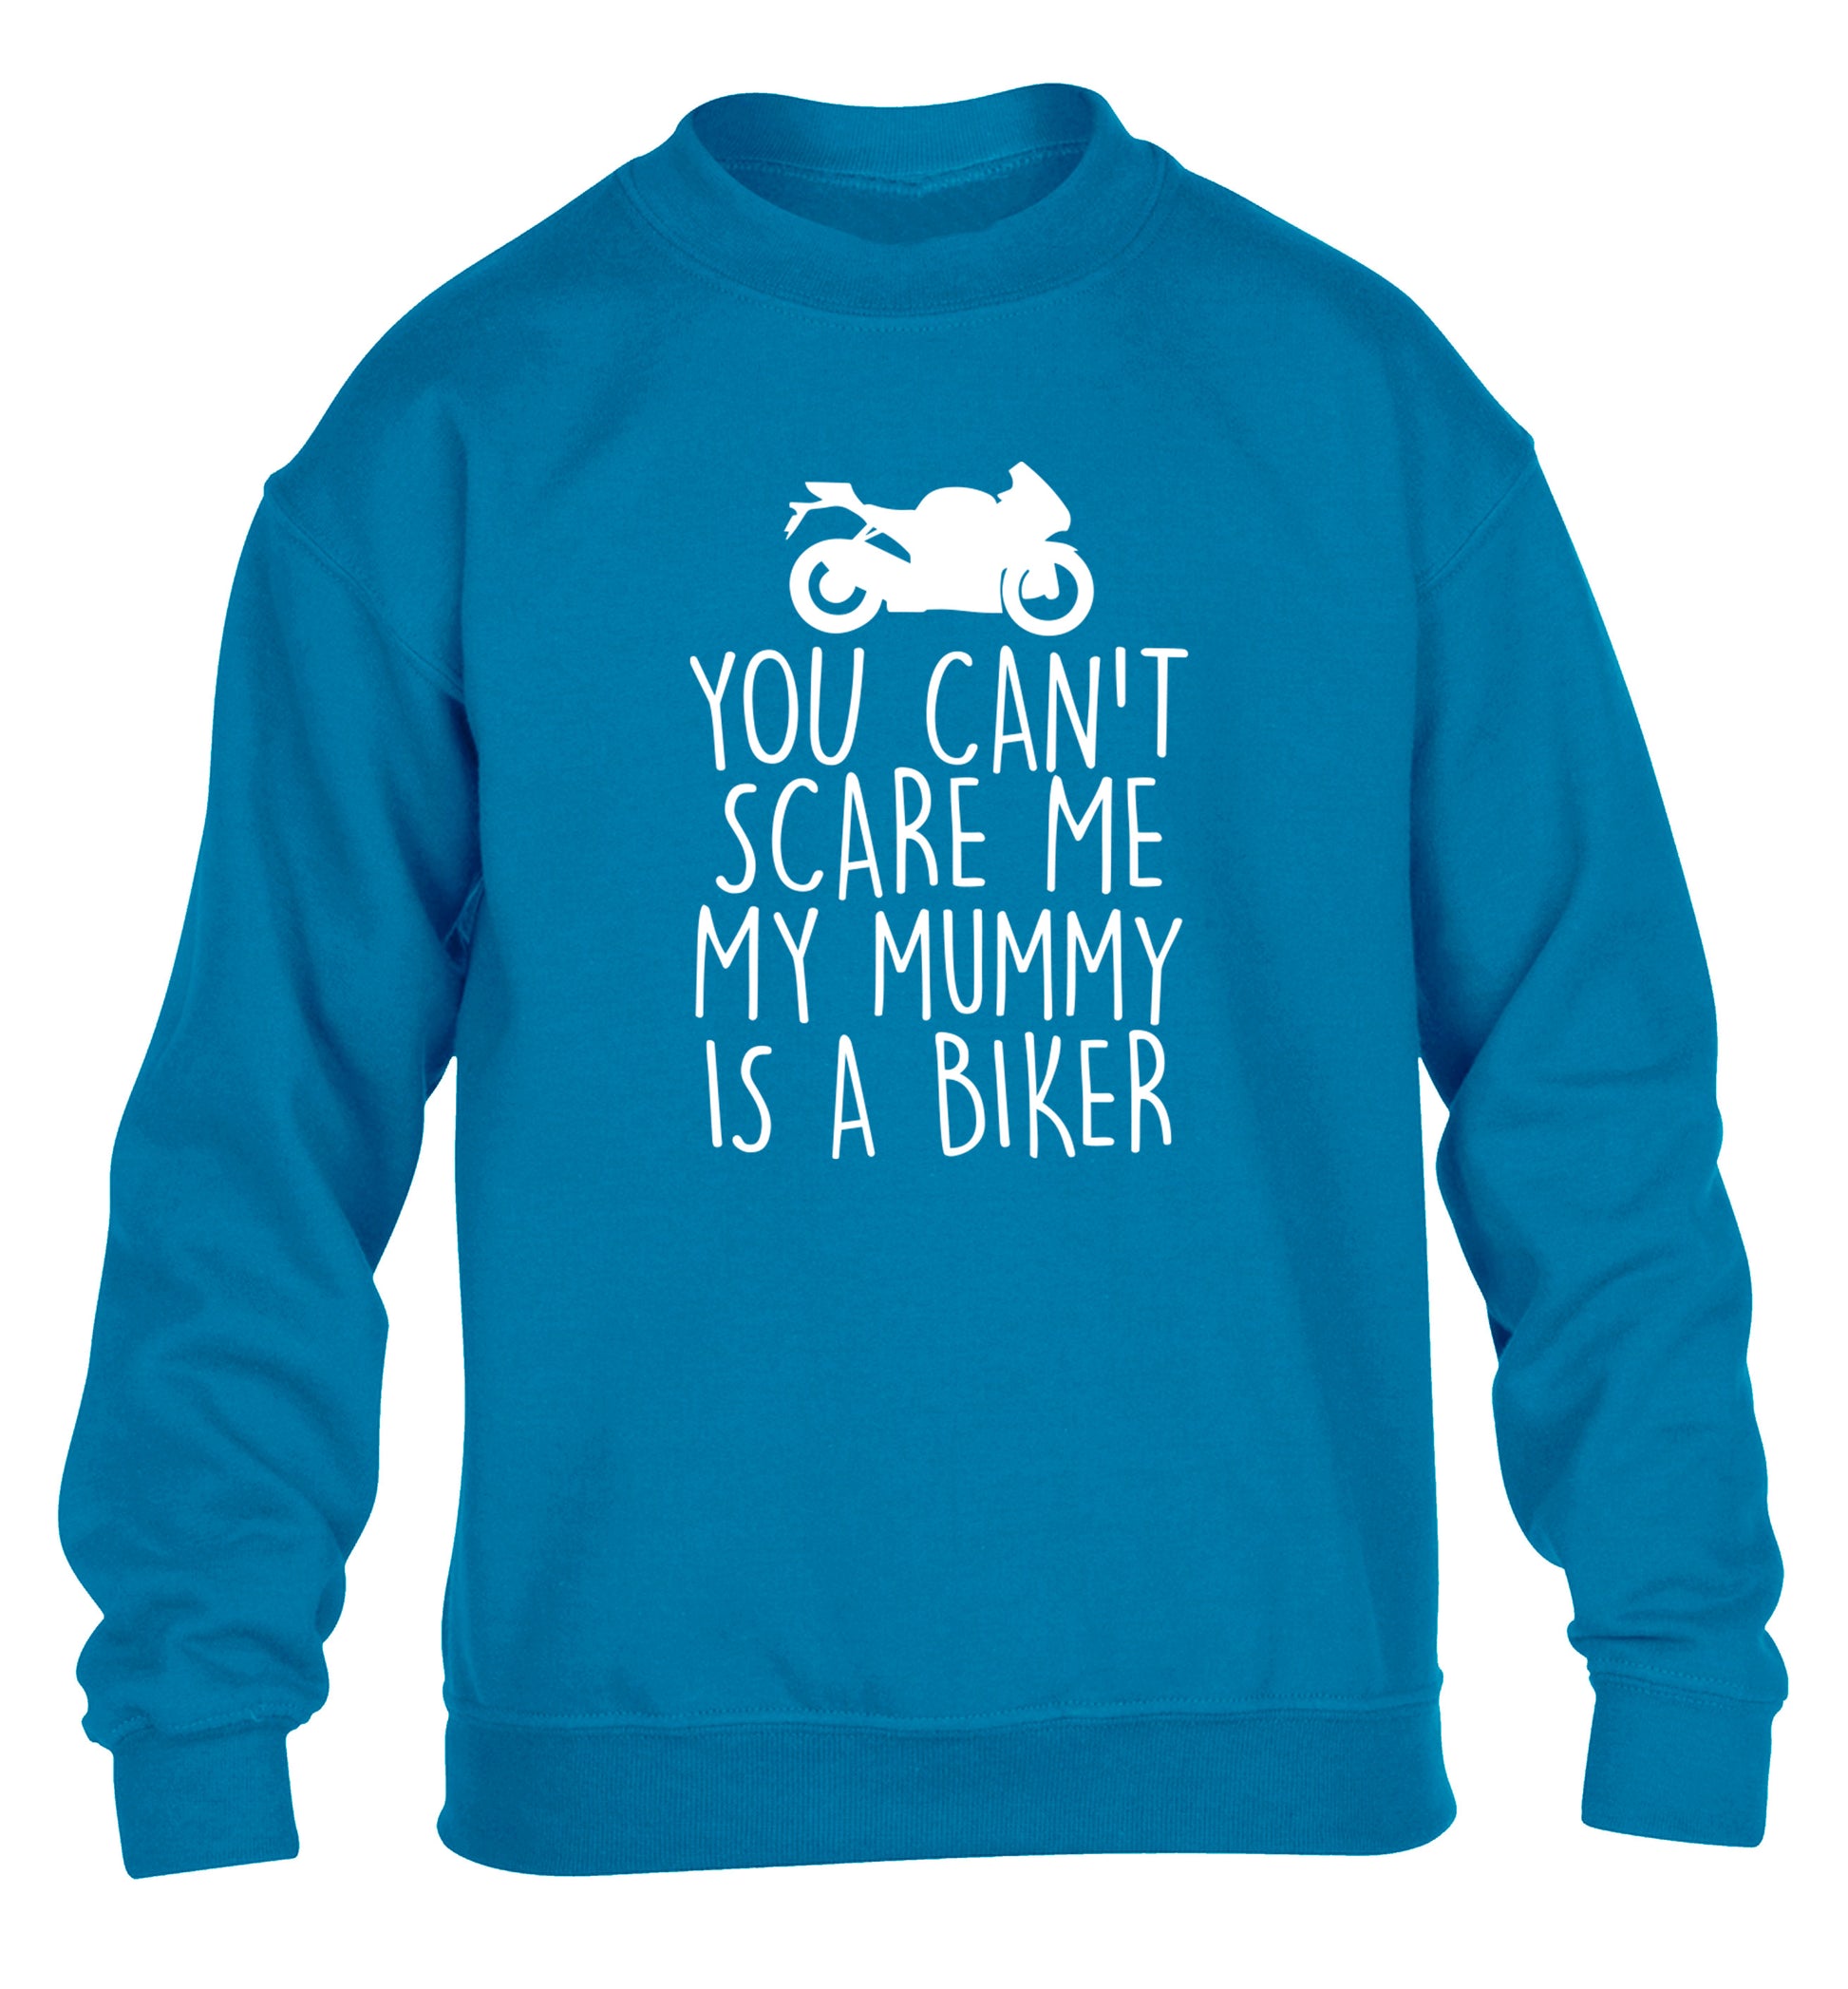 You can't scare me my mummy is a biker children's blue sweater 12-13 Years